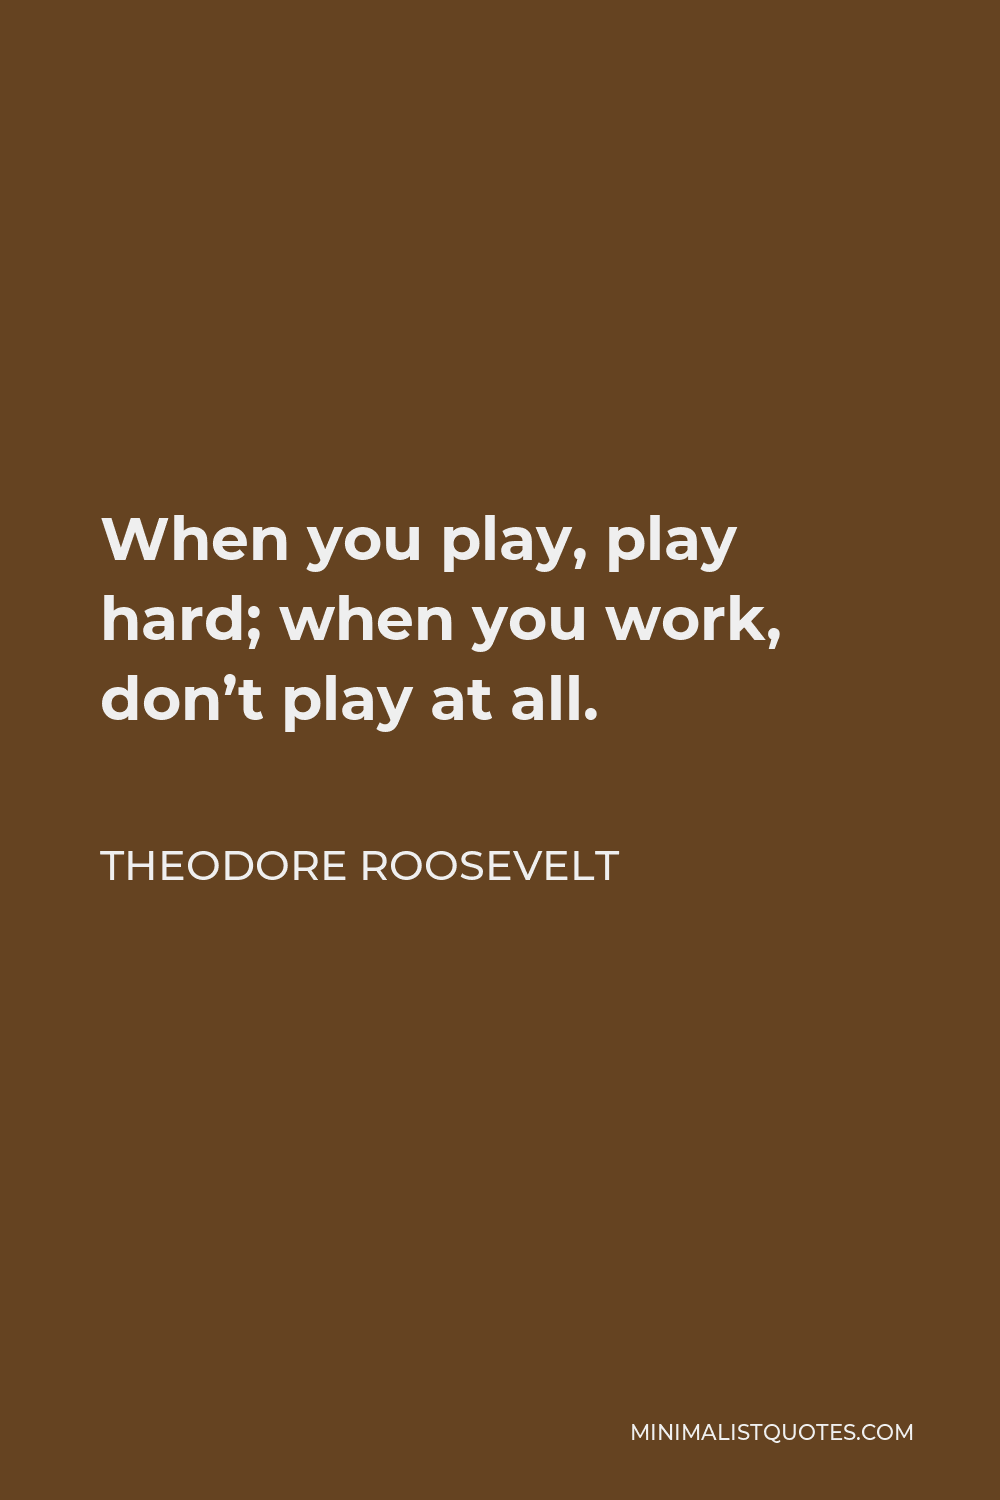 Theodore Roosevelt Quote - When you play, play hard; when you work, don’t play at all.